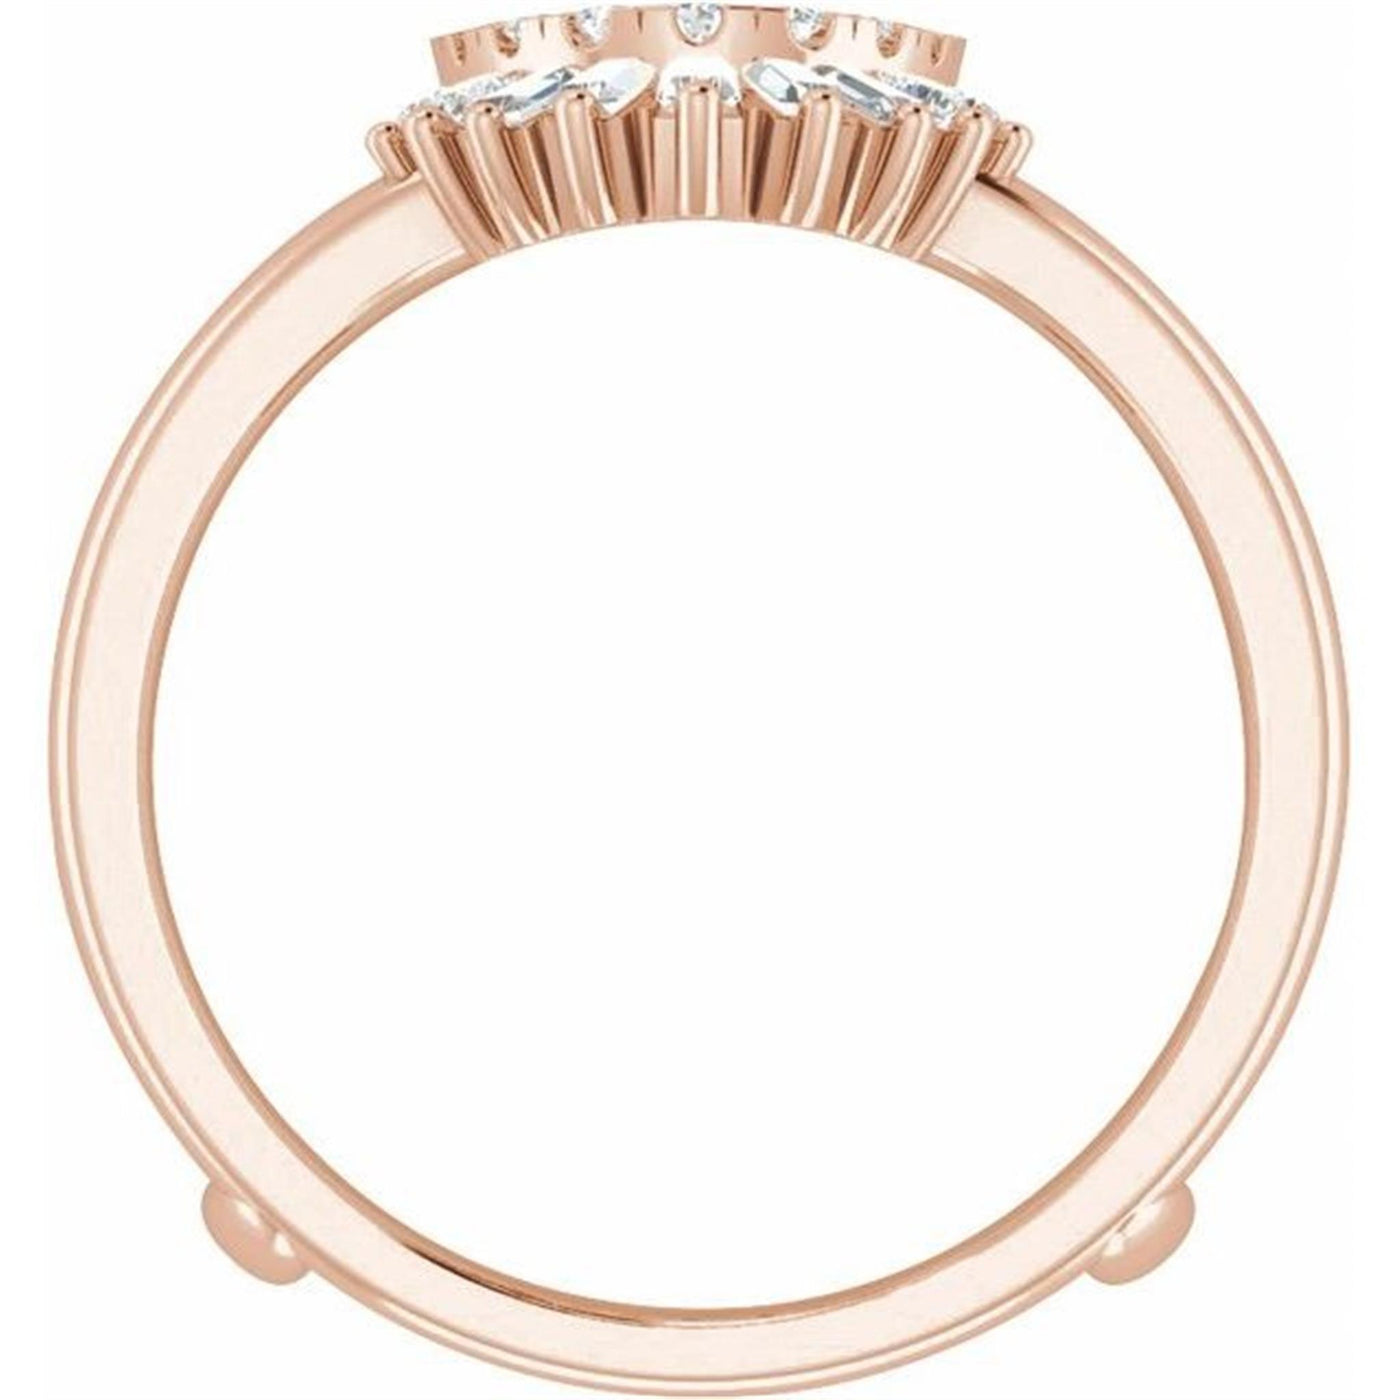 Ever & Ever 14K Rose Gold .50ctw Diamond Ring Guard